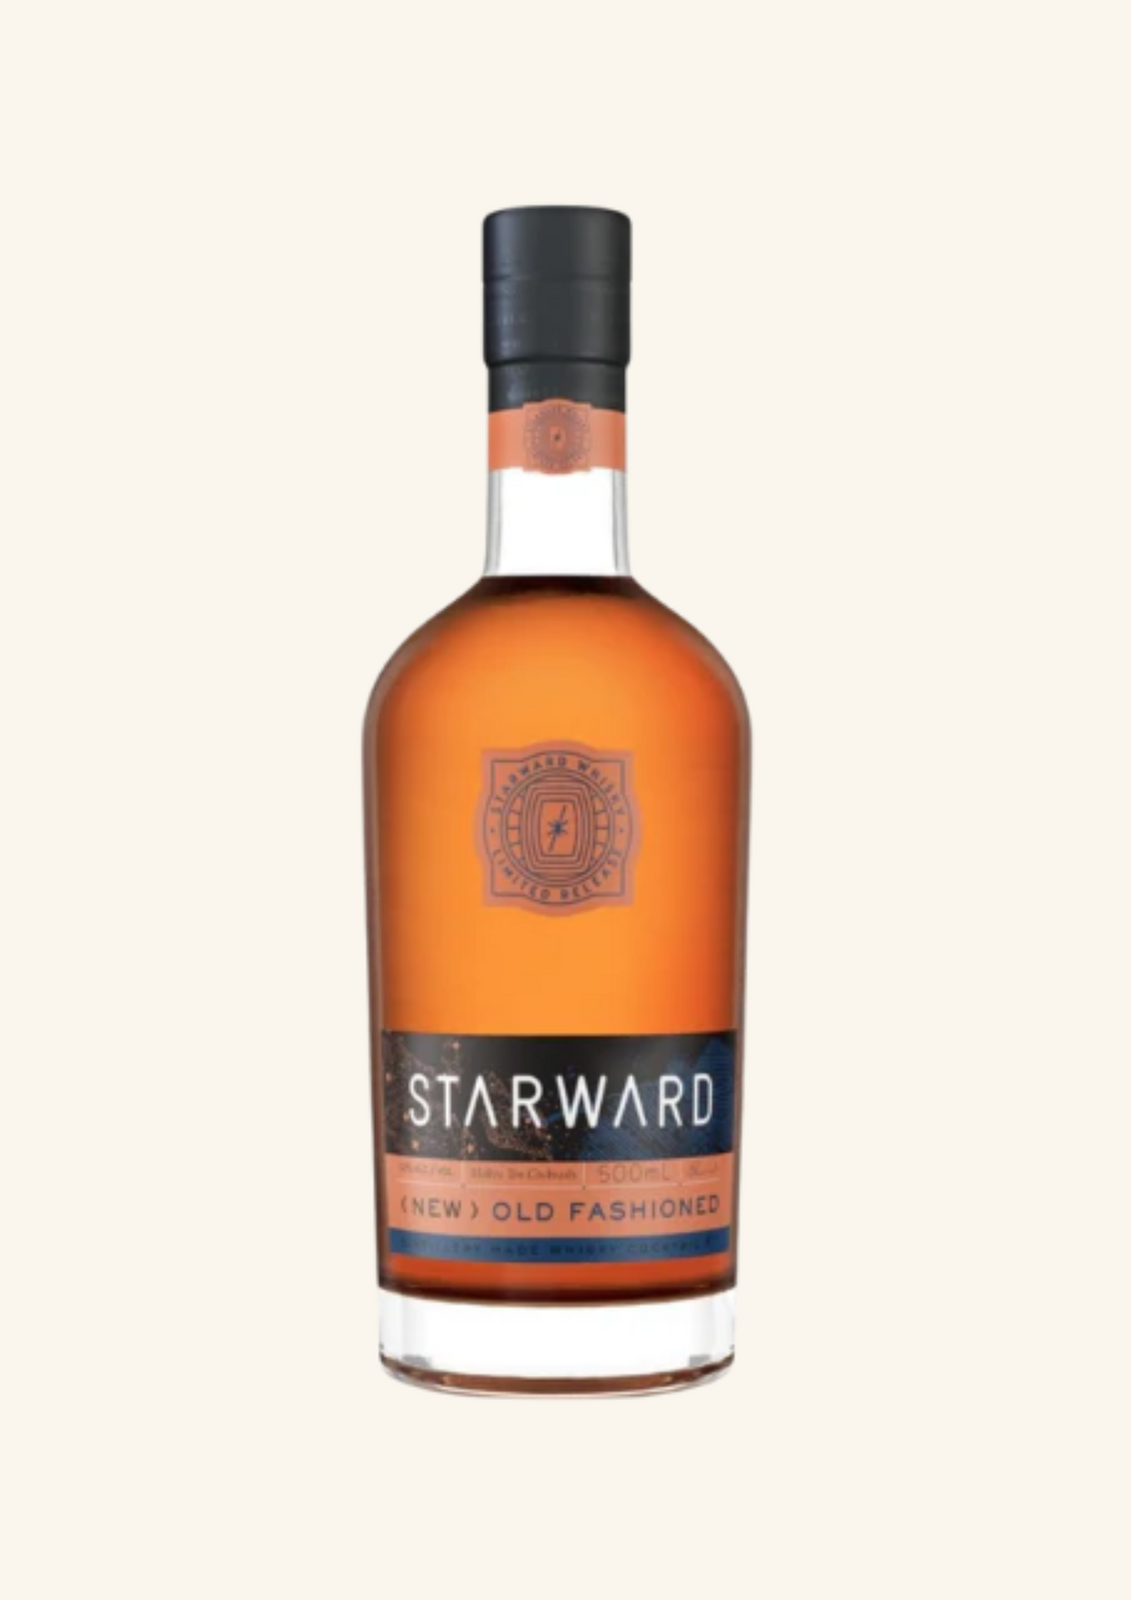 Starward (New) Old Fashioned Cocktail